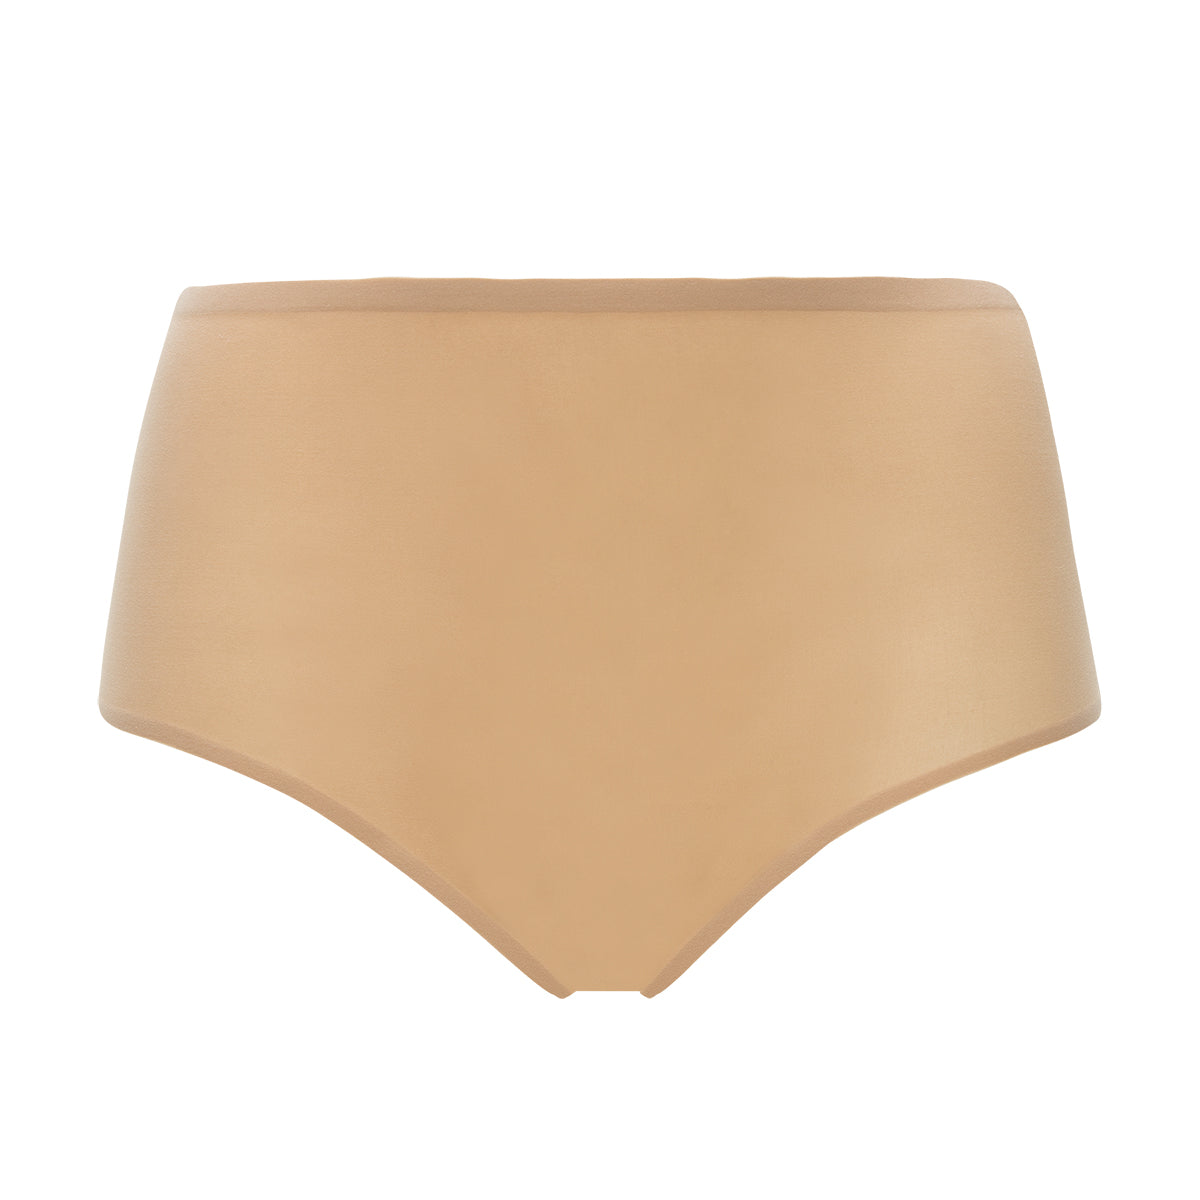 Chantelle Soft Stretch Brief 2647 in nude beige cafe seamless panty lingerie canada linea intima